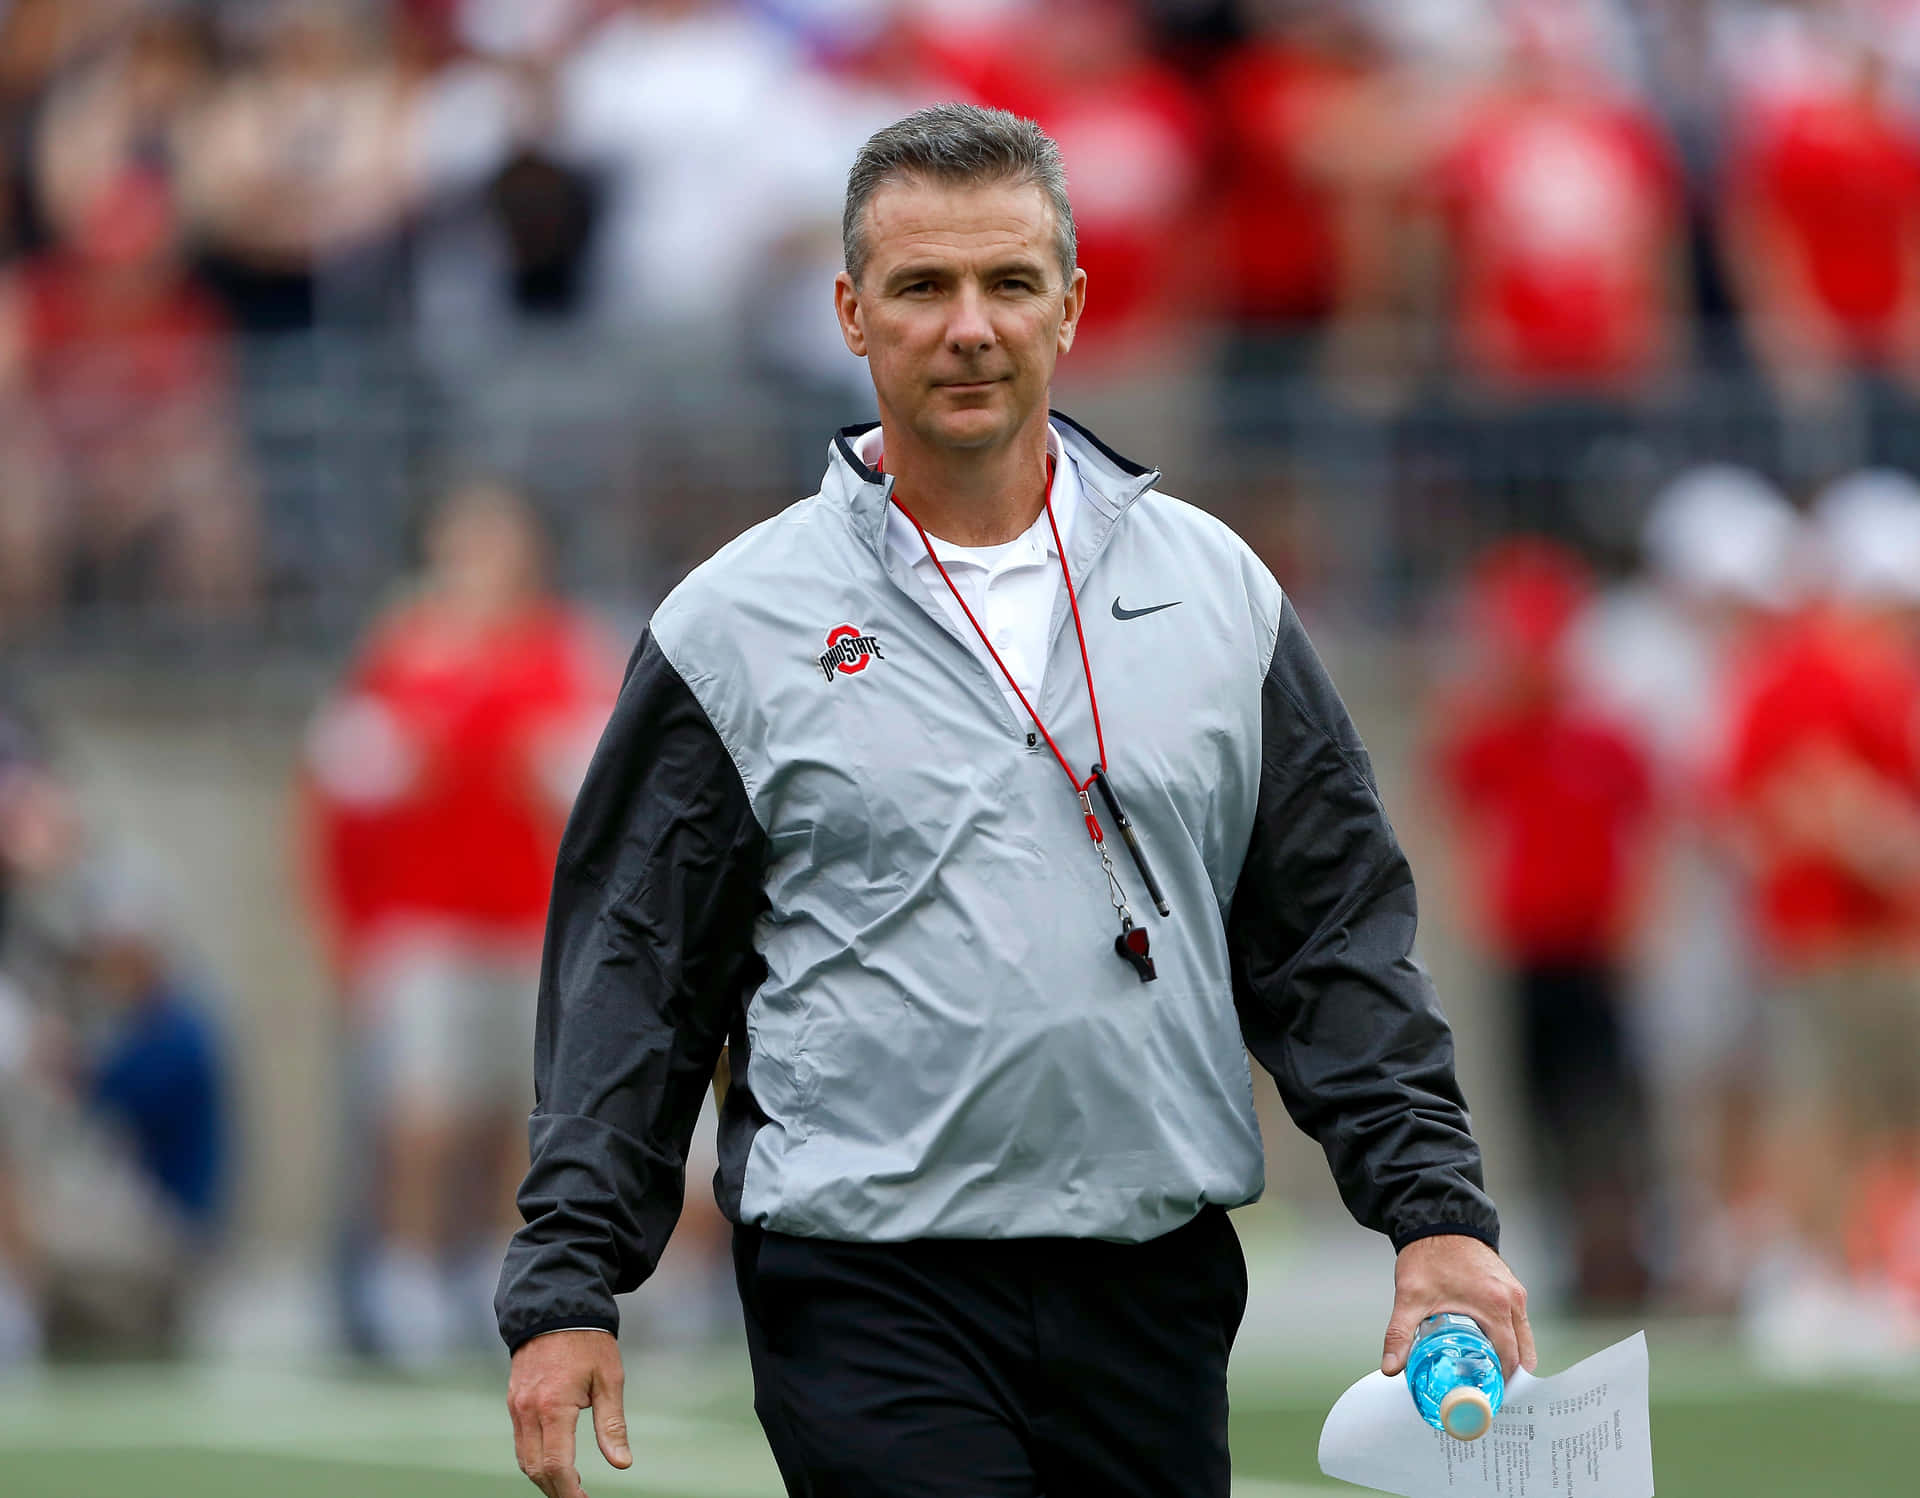 Urban Meyer Brings Passion, Excellence To Football